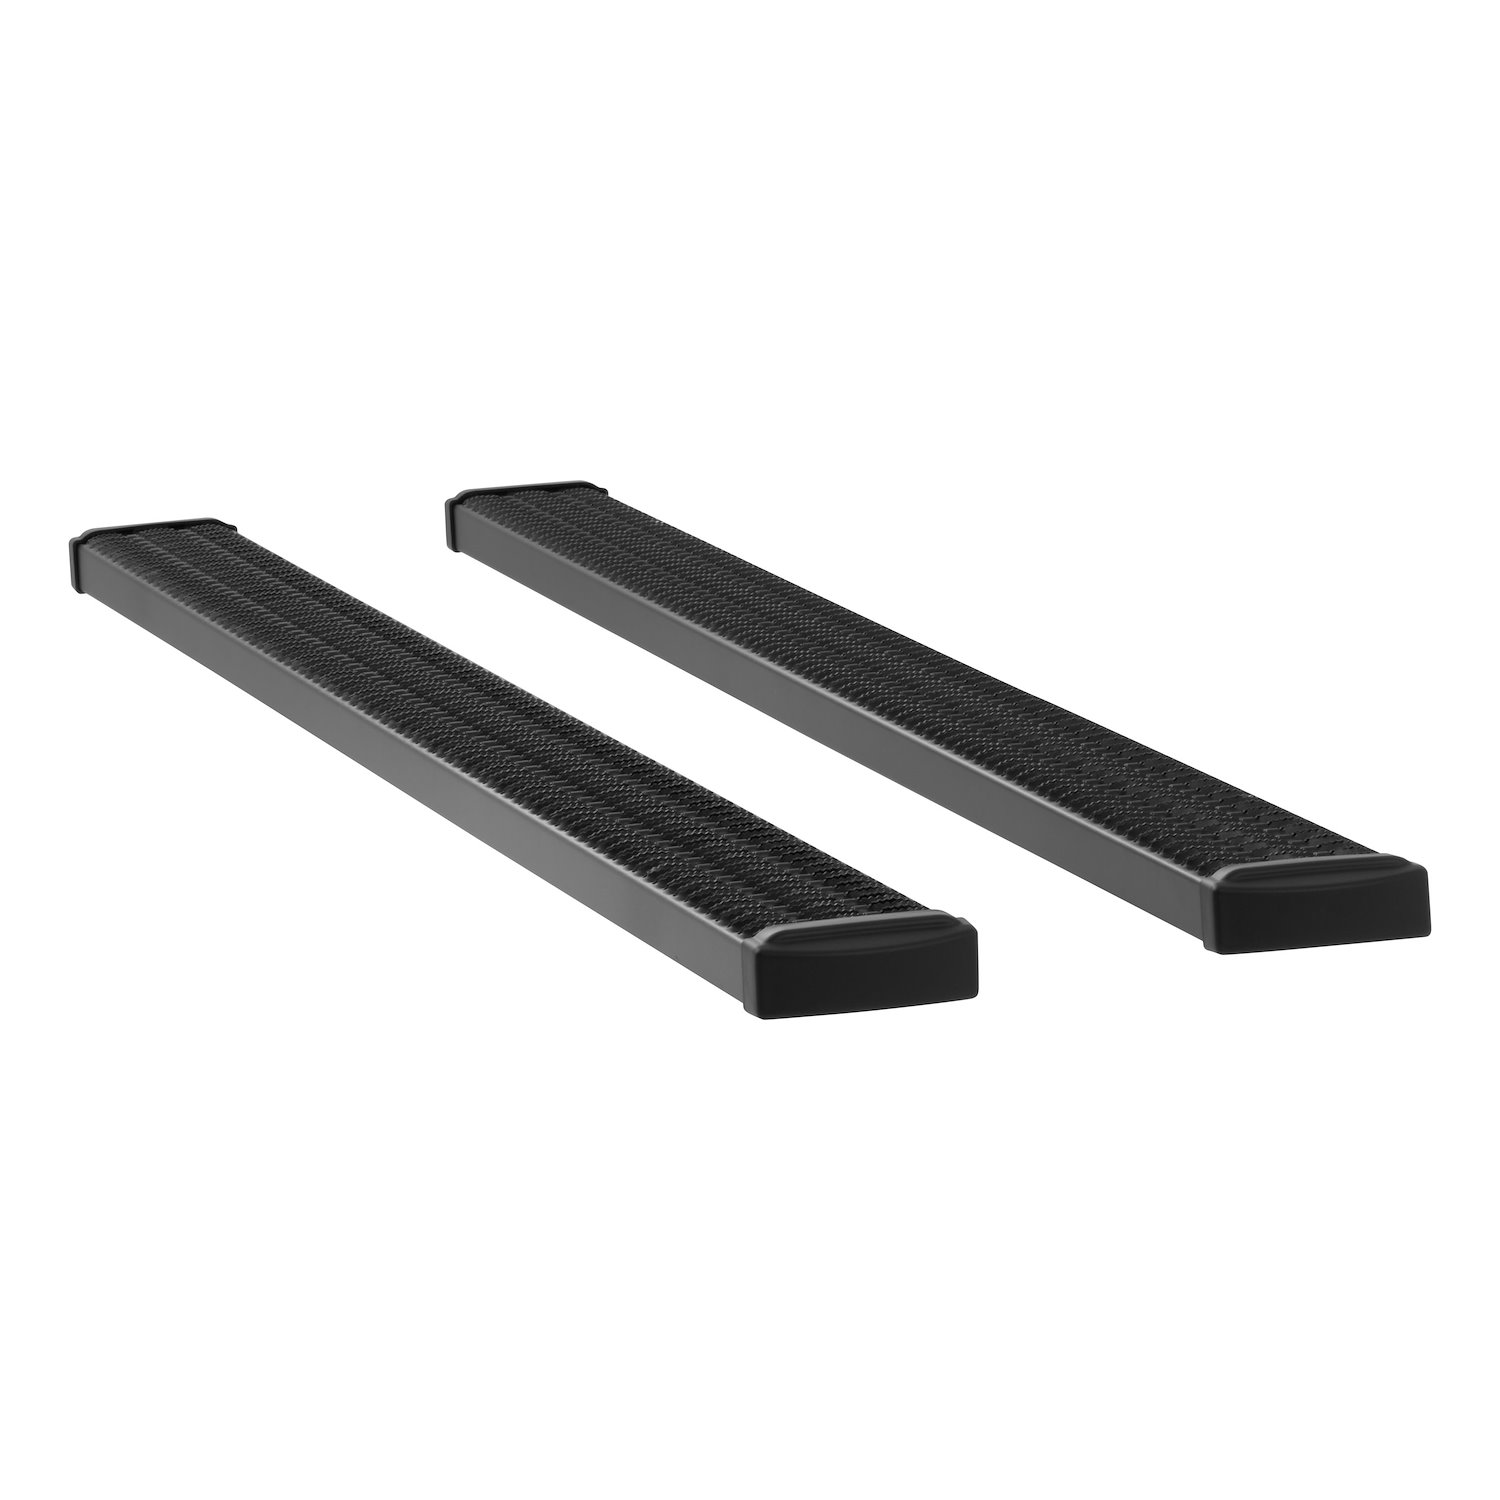 415098-401725 Grip Step 7 in. x 98 in. Black Aluminum Running Boards Fits Select Ford Transit